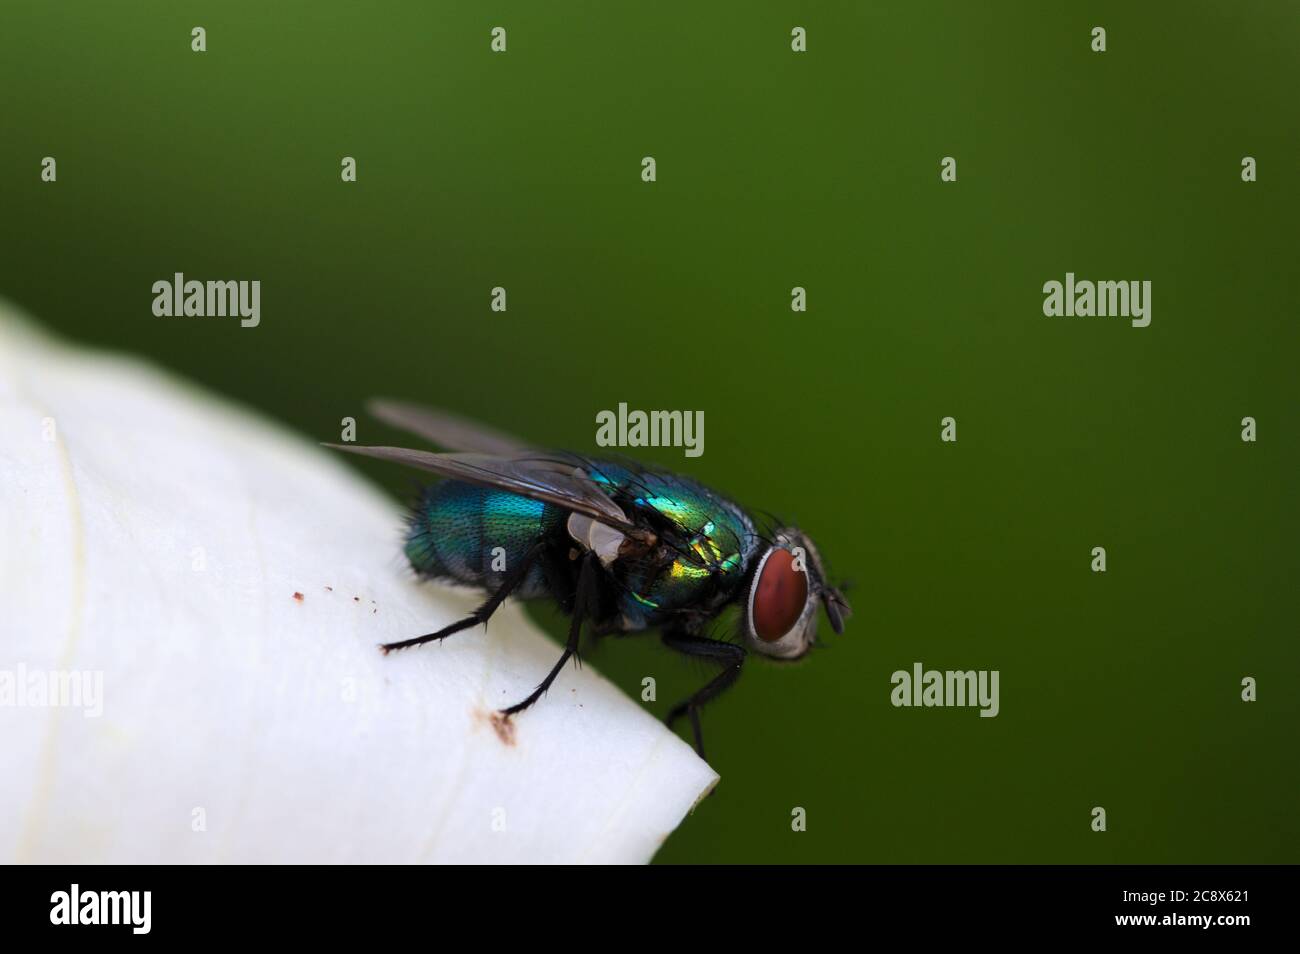 Close-up of a common green bottle fly (Phaenicia sericata or Lucilia sericata) perched on a white flower and with green copy space to the right of the Stock Photo